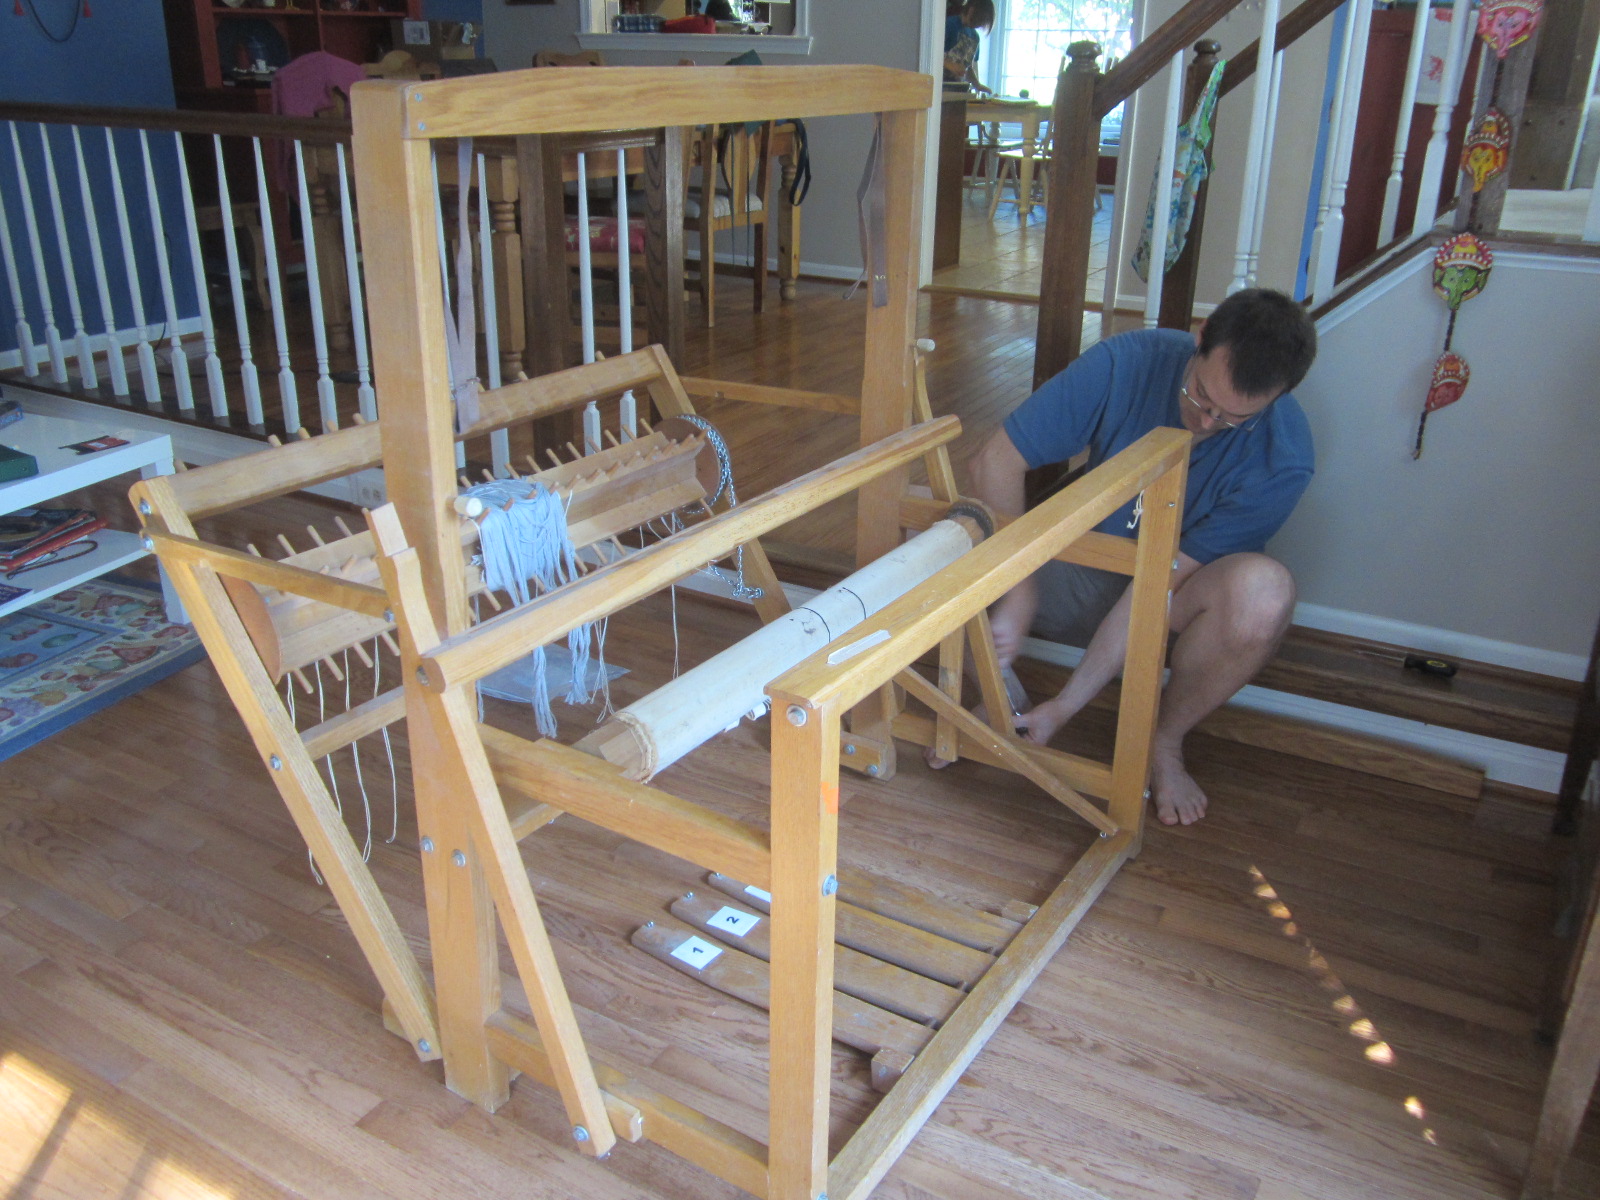 The almost assembled loom